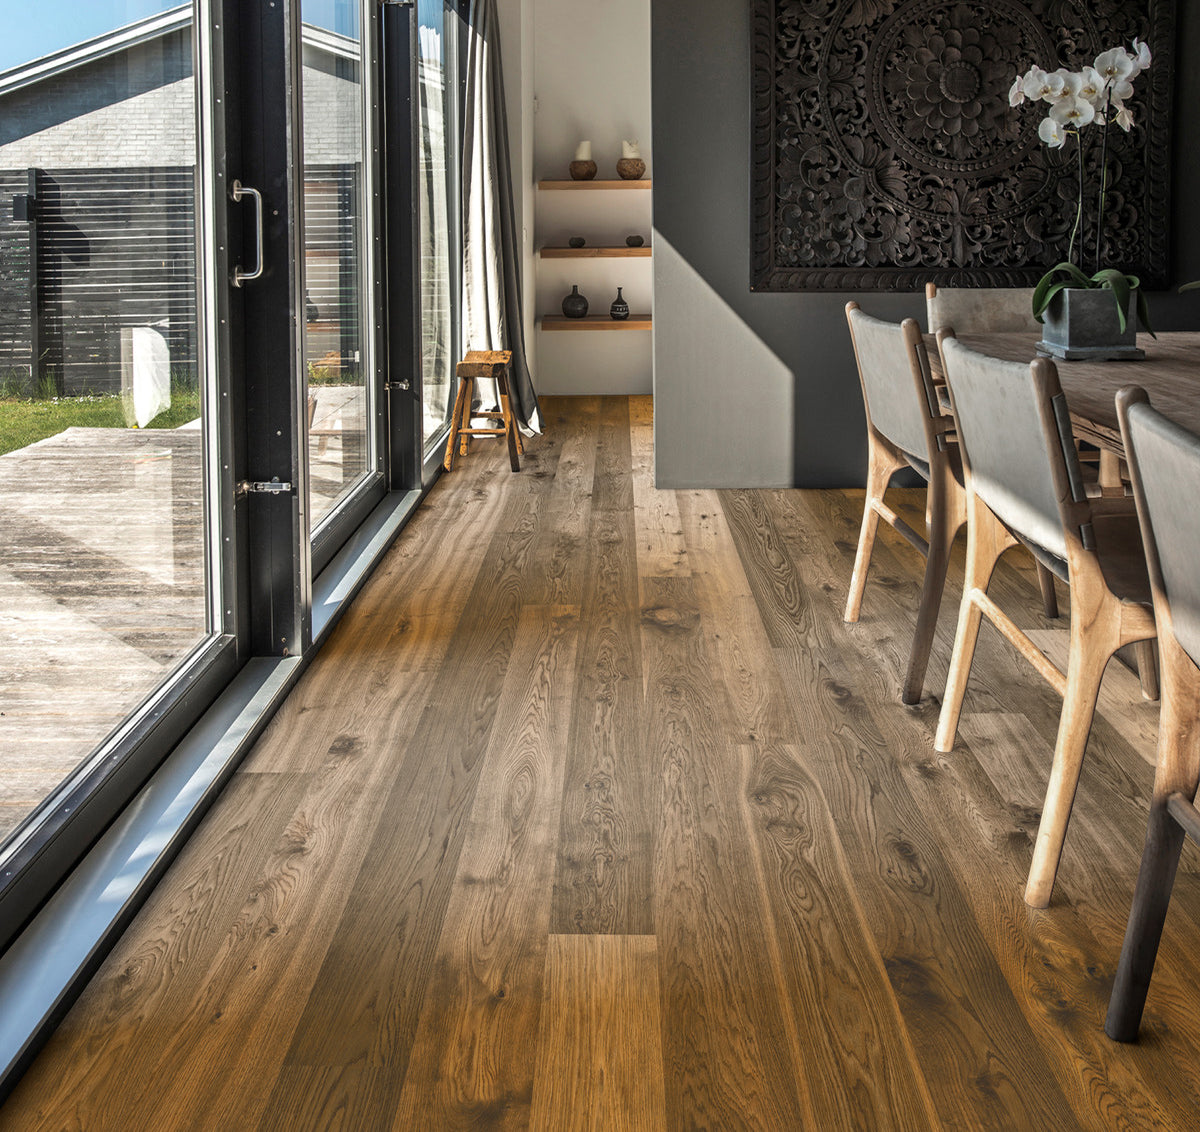 Terrace wide plank hardwood flooring used in home inspiration photo